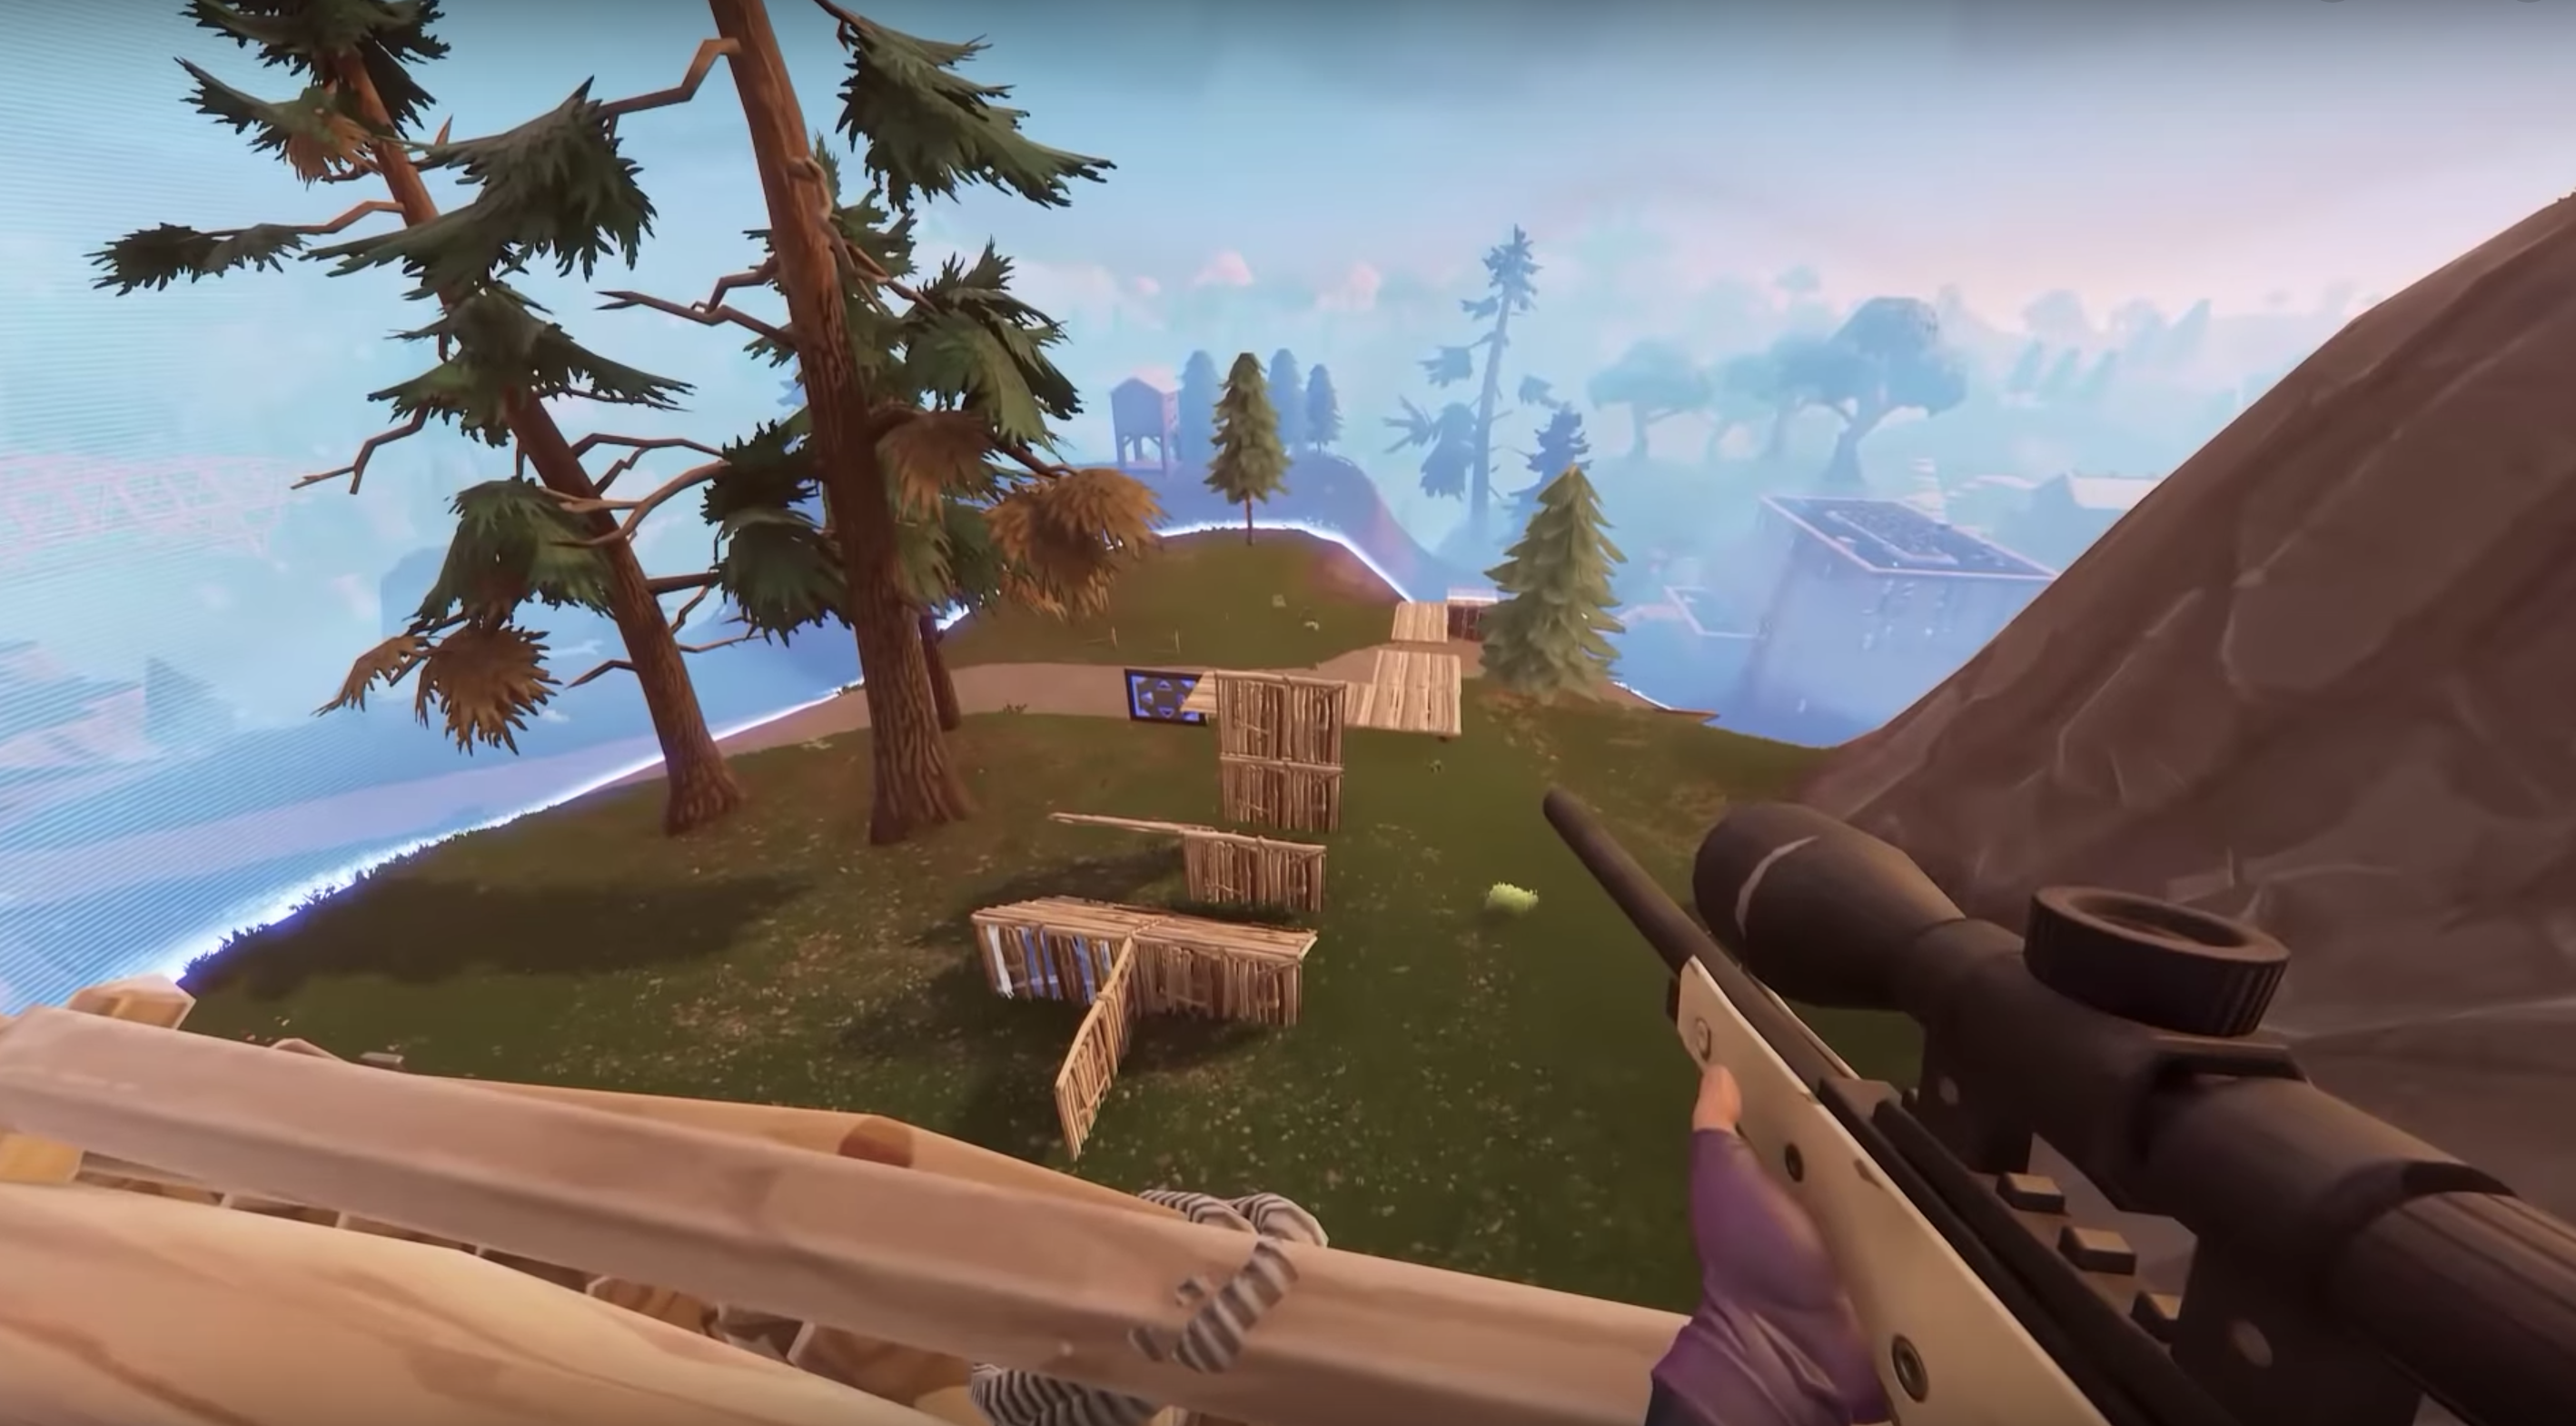 YouTuber creates concept video showing Fortnite in first-person mode |  TechCrunch